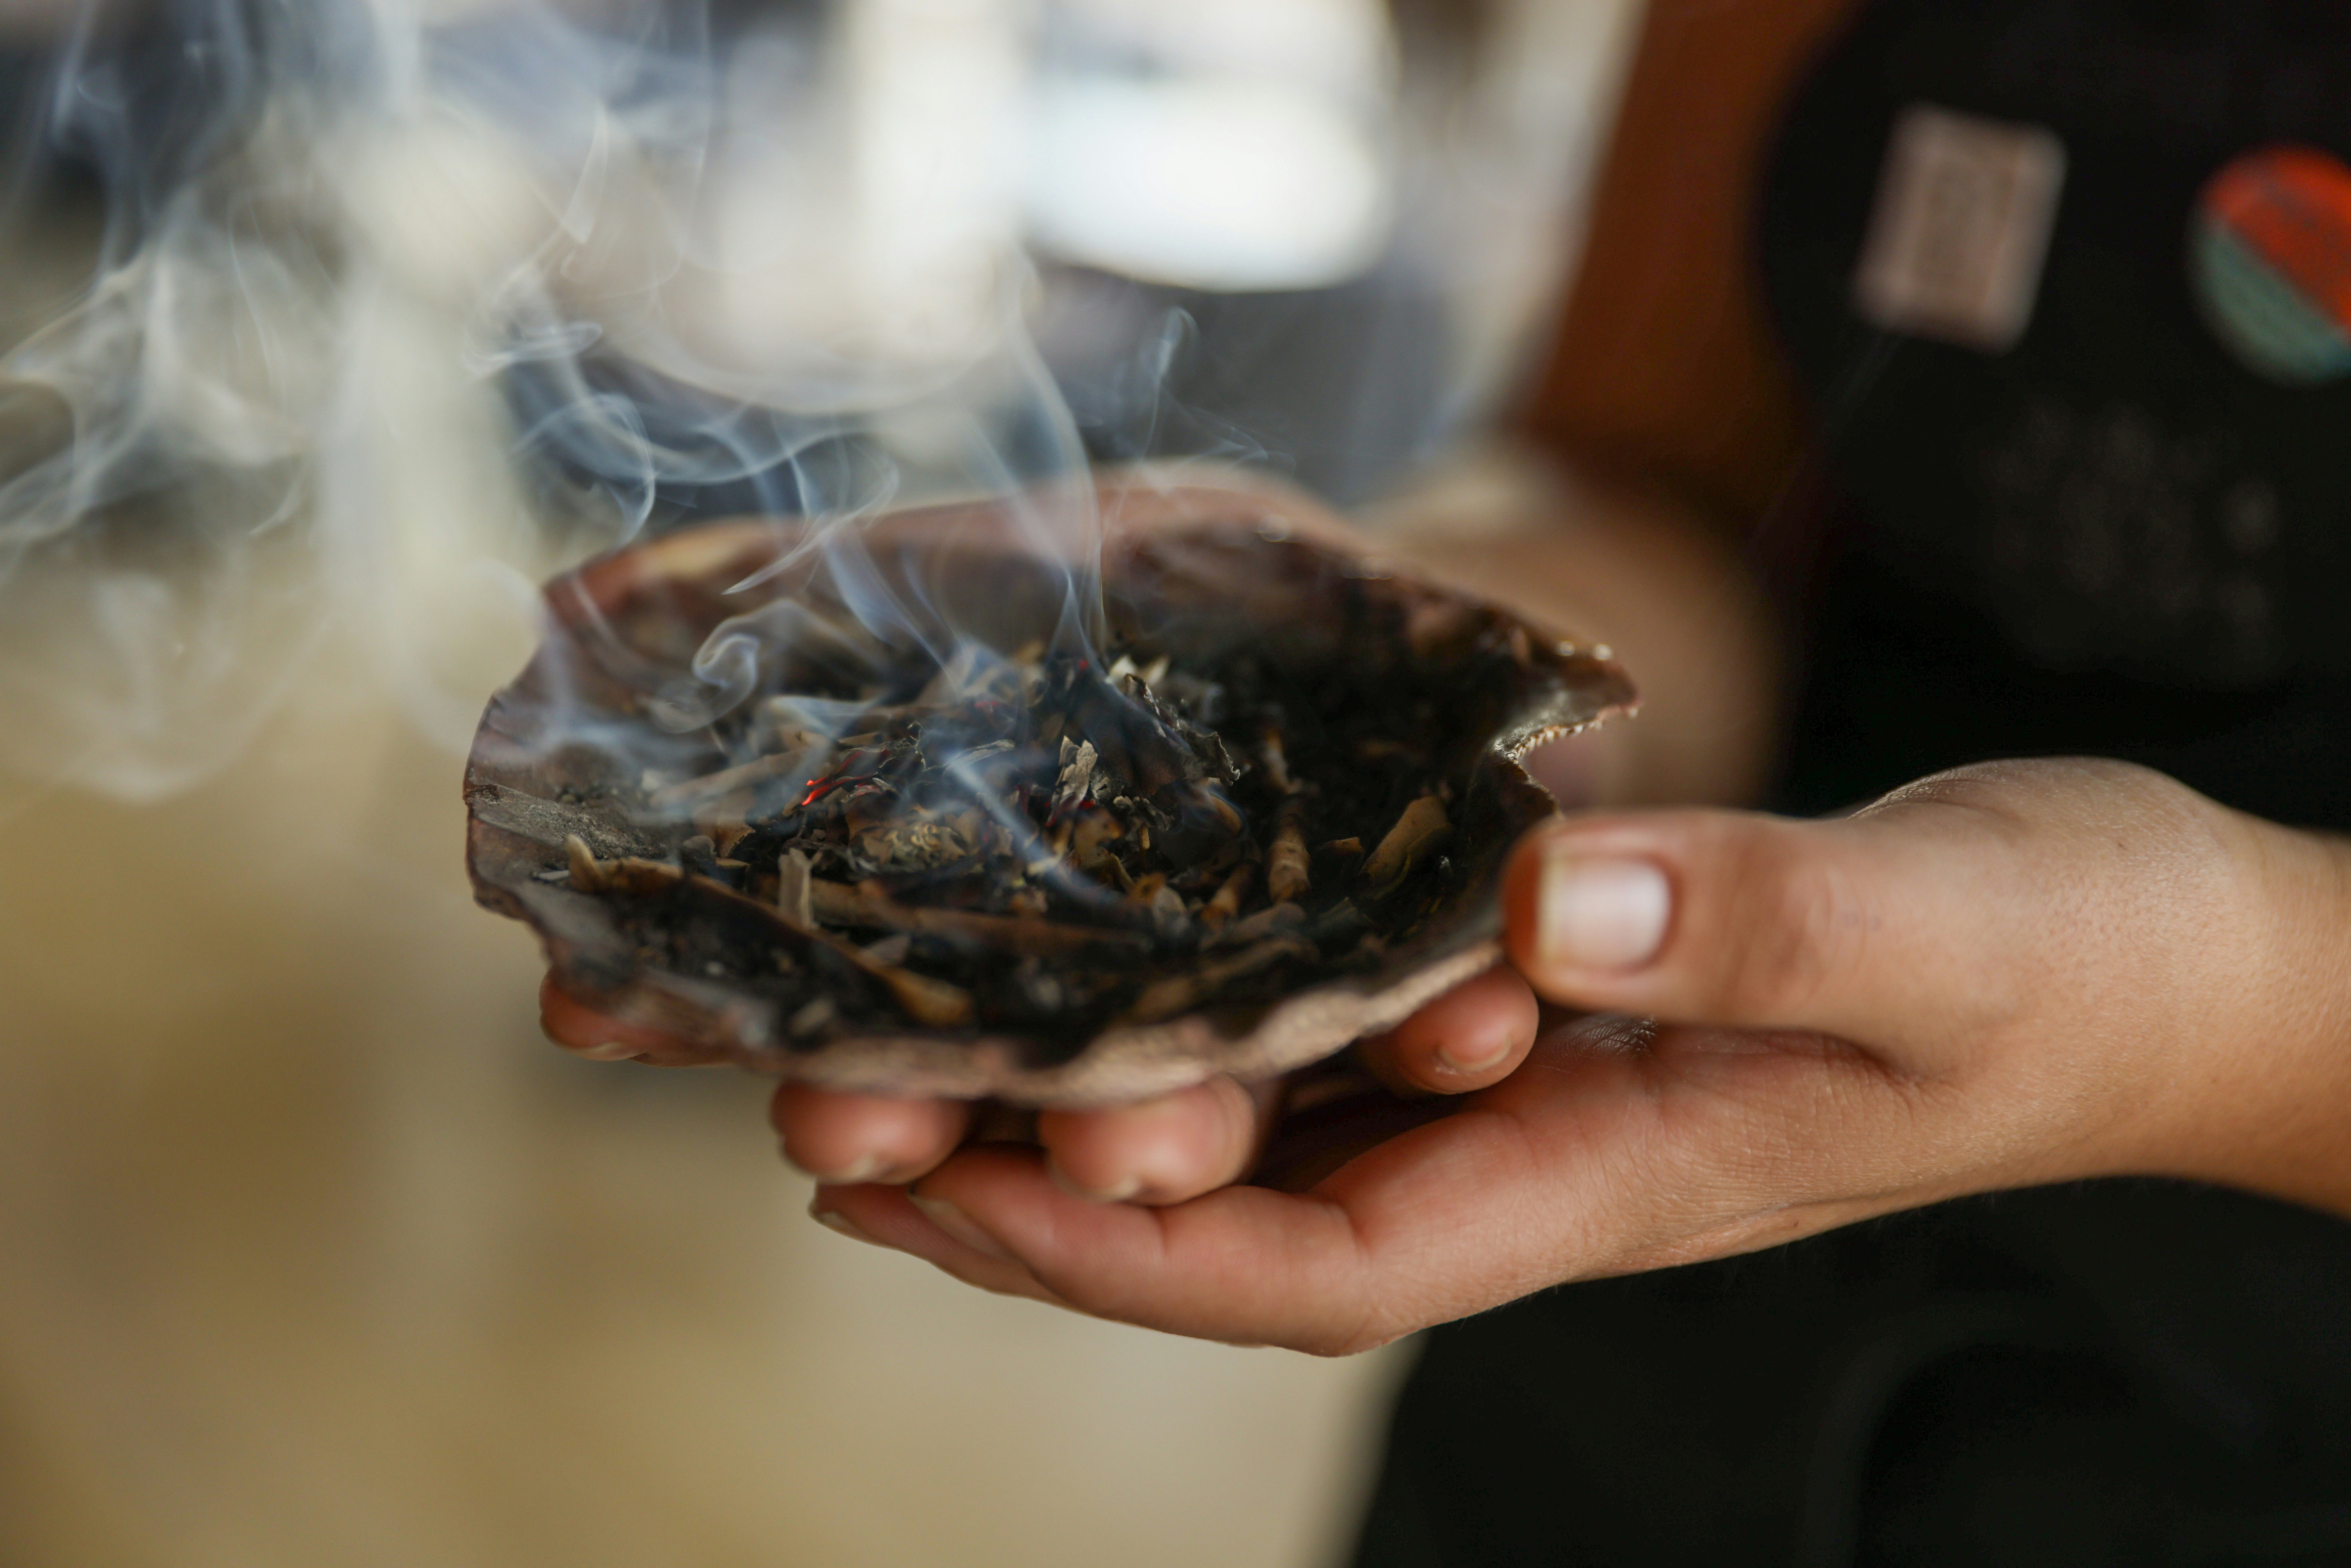 Smudging the restaurant Owamni by The Sioux Chef with sage from a shell